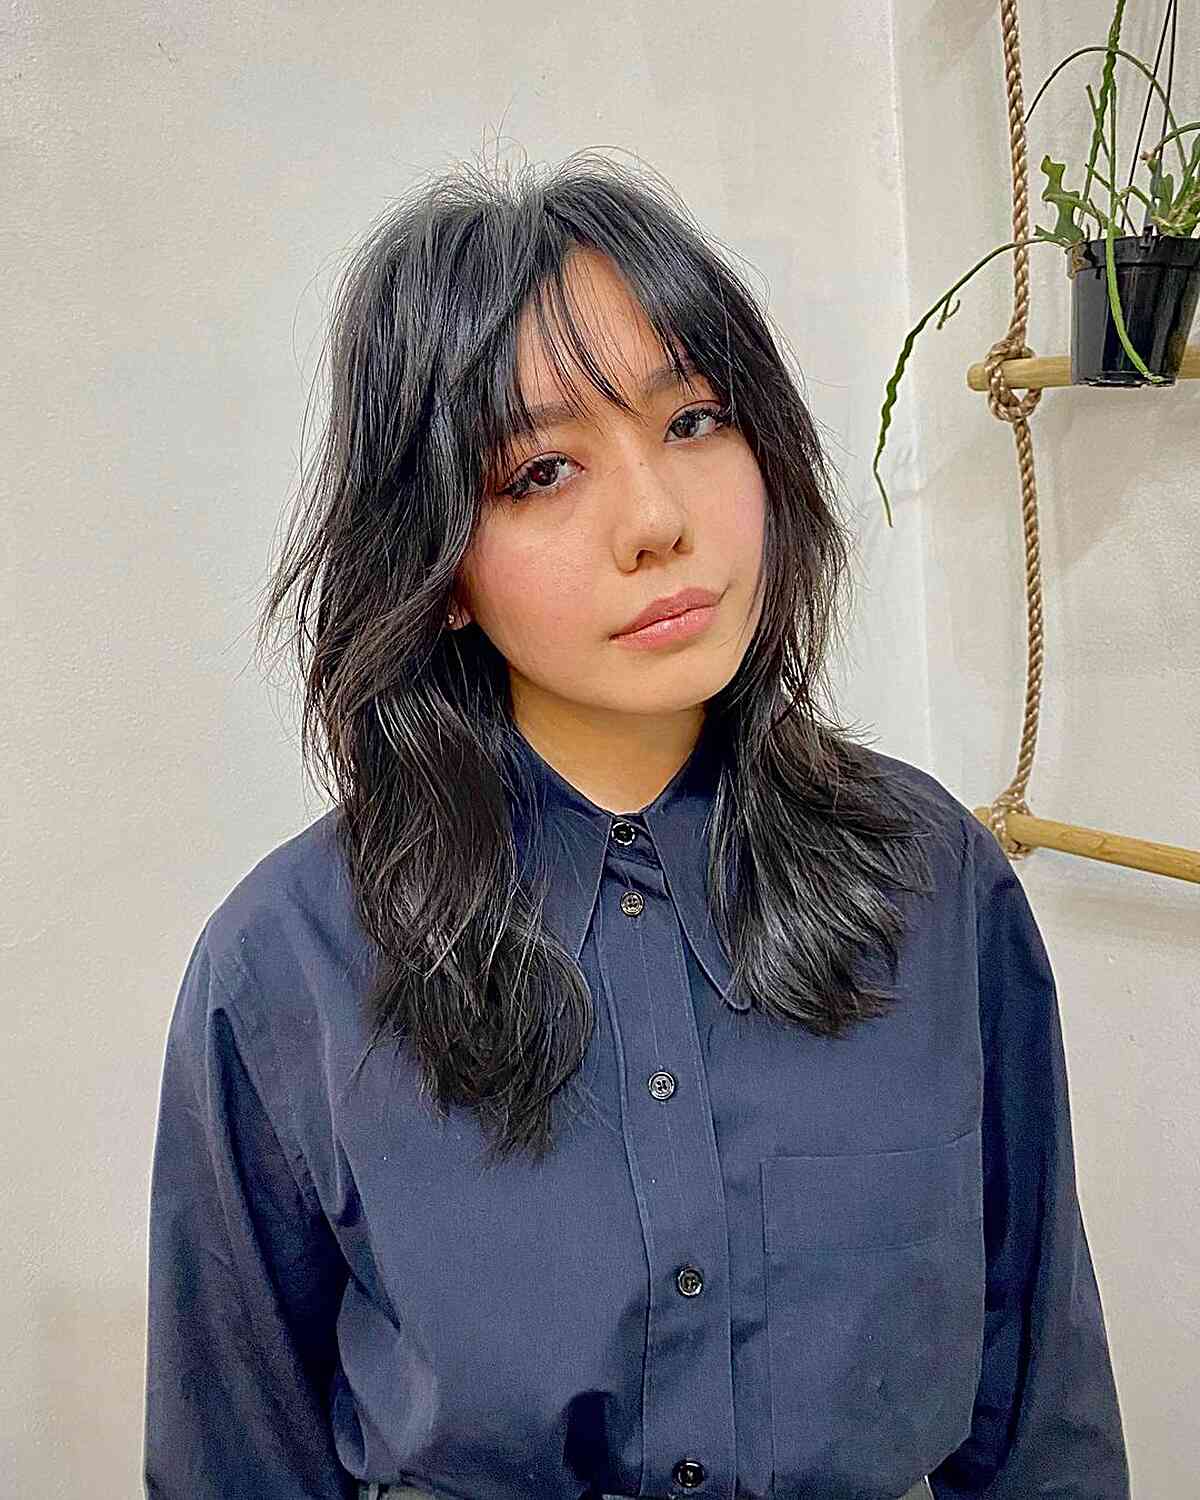 Effortless Loose Waves and Layers and Bangs